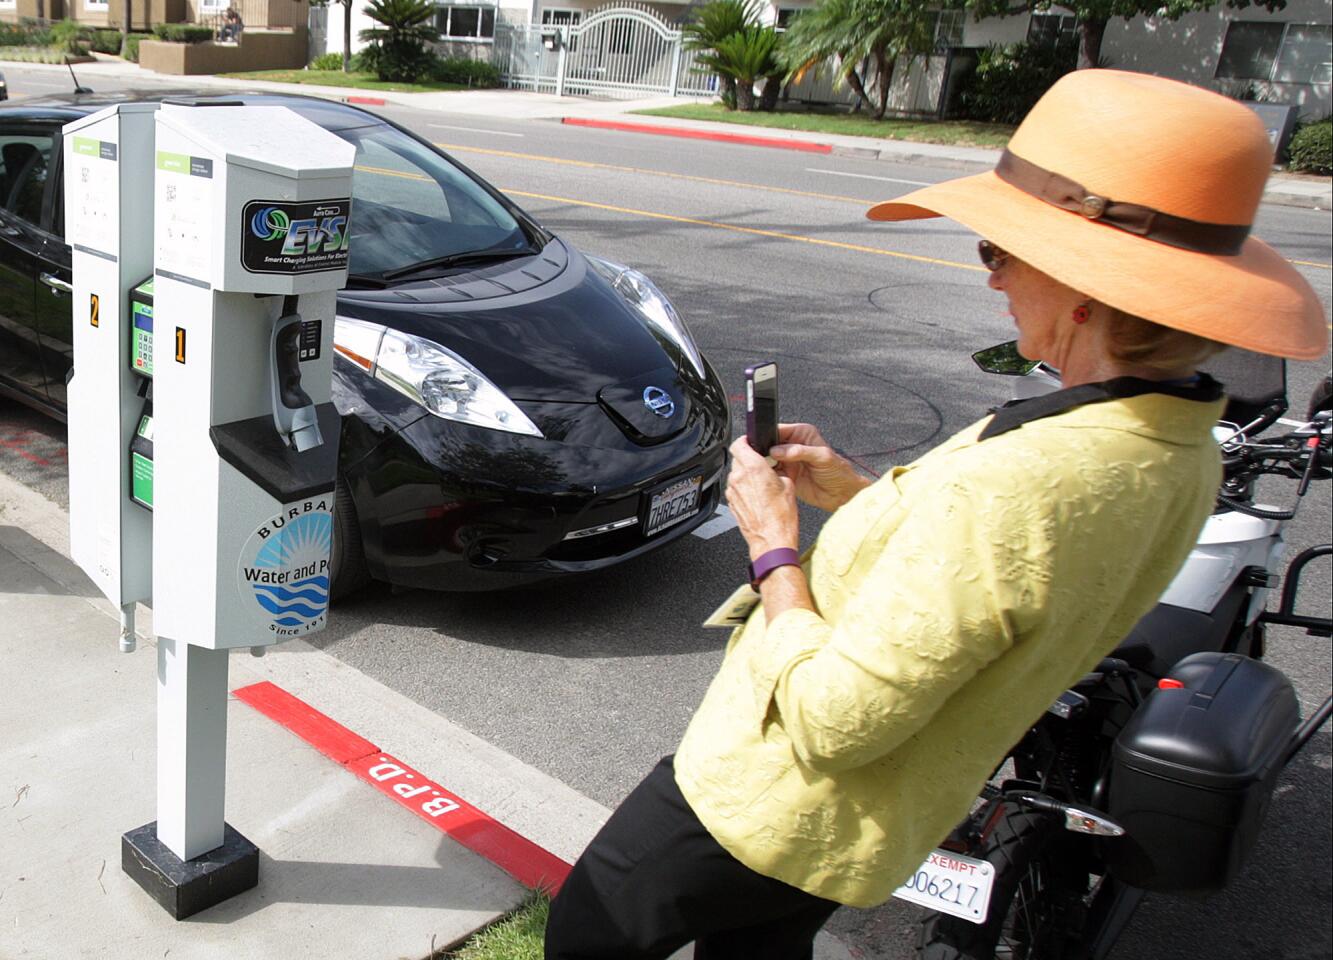 Burbank Councilwoman Emily Gabel-Luddy takes a picture of an EV charging station at a demonstration and ribbon cutting for one of eight dual-charger electric-vehicle charging station on Buena Vista Avenue in front of the Buena Vista Branch Library in Burbank on Tuesday, August 25, 2015. The credit card based EV charging system has parking for EV vehicles only.